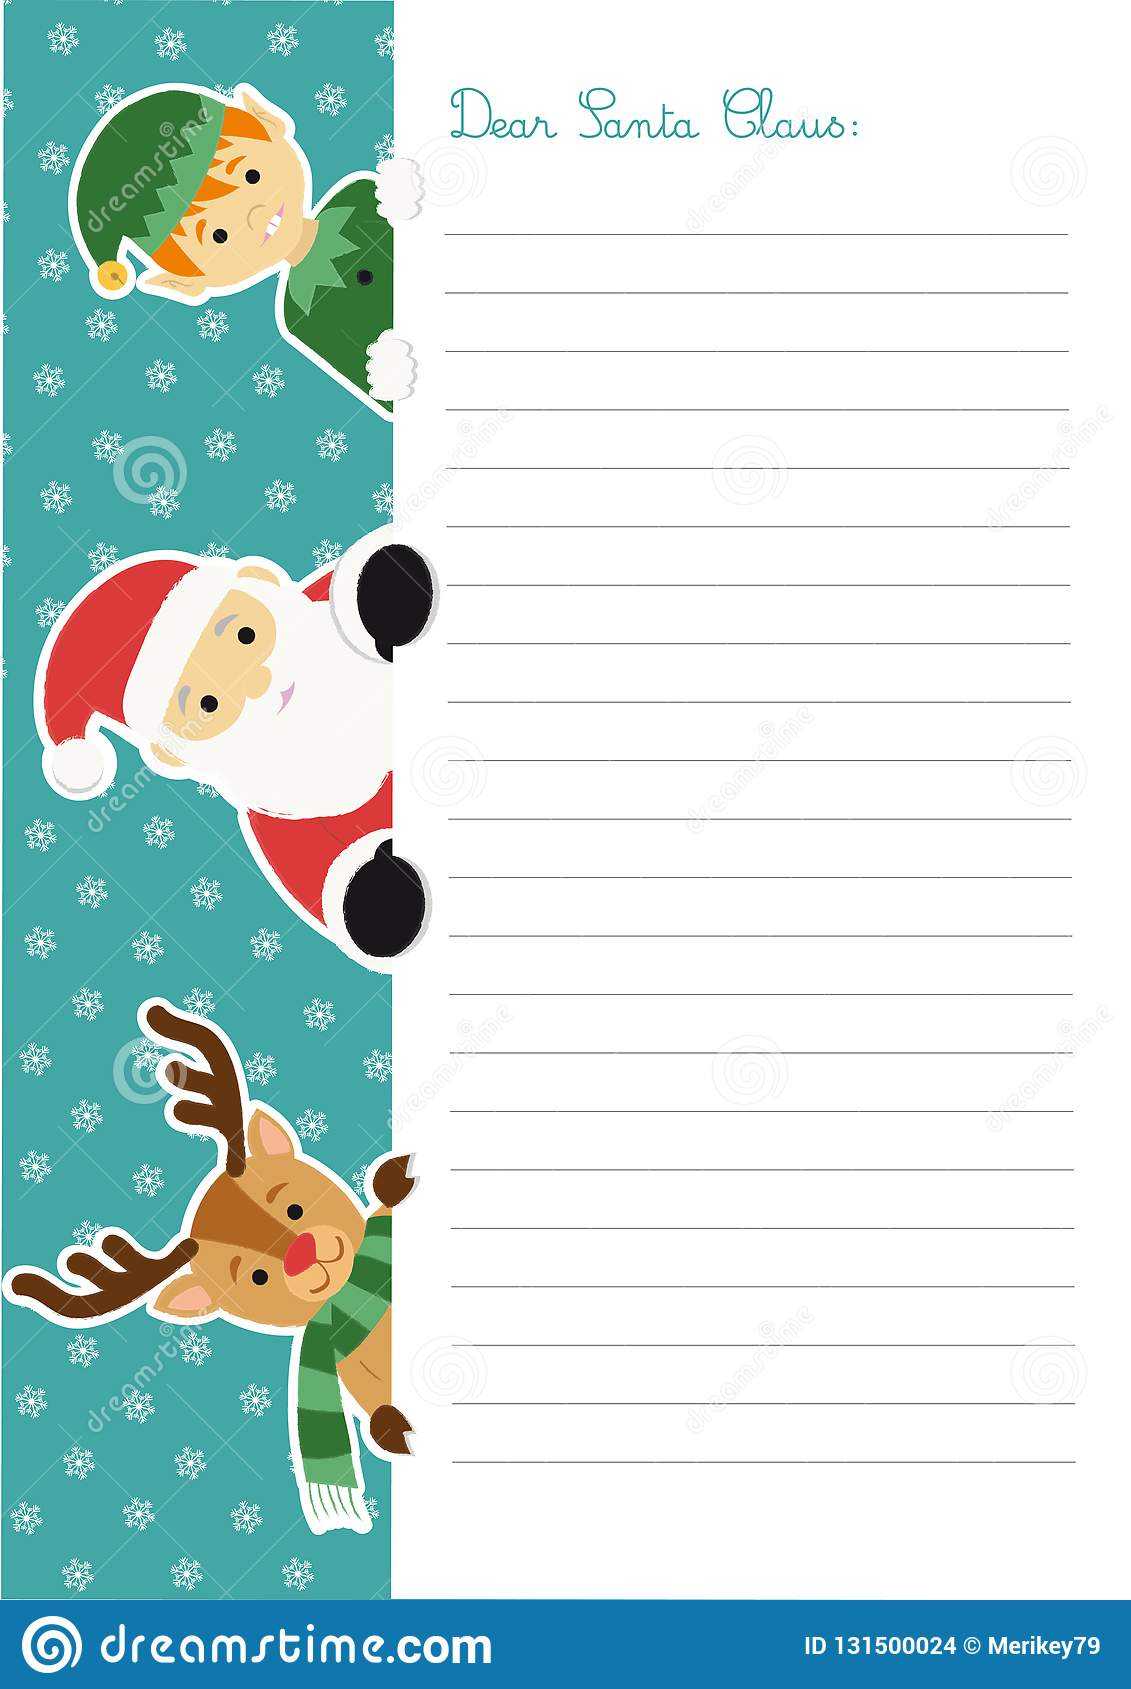 Letter Template To Santa Claus With An Elf And A Reindeer In Blank Letter From Santa Template